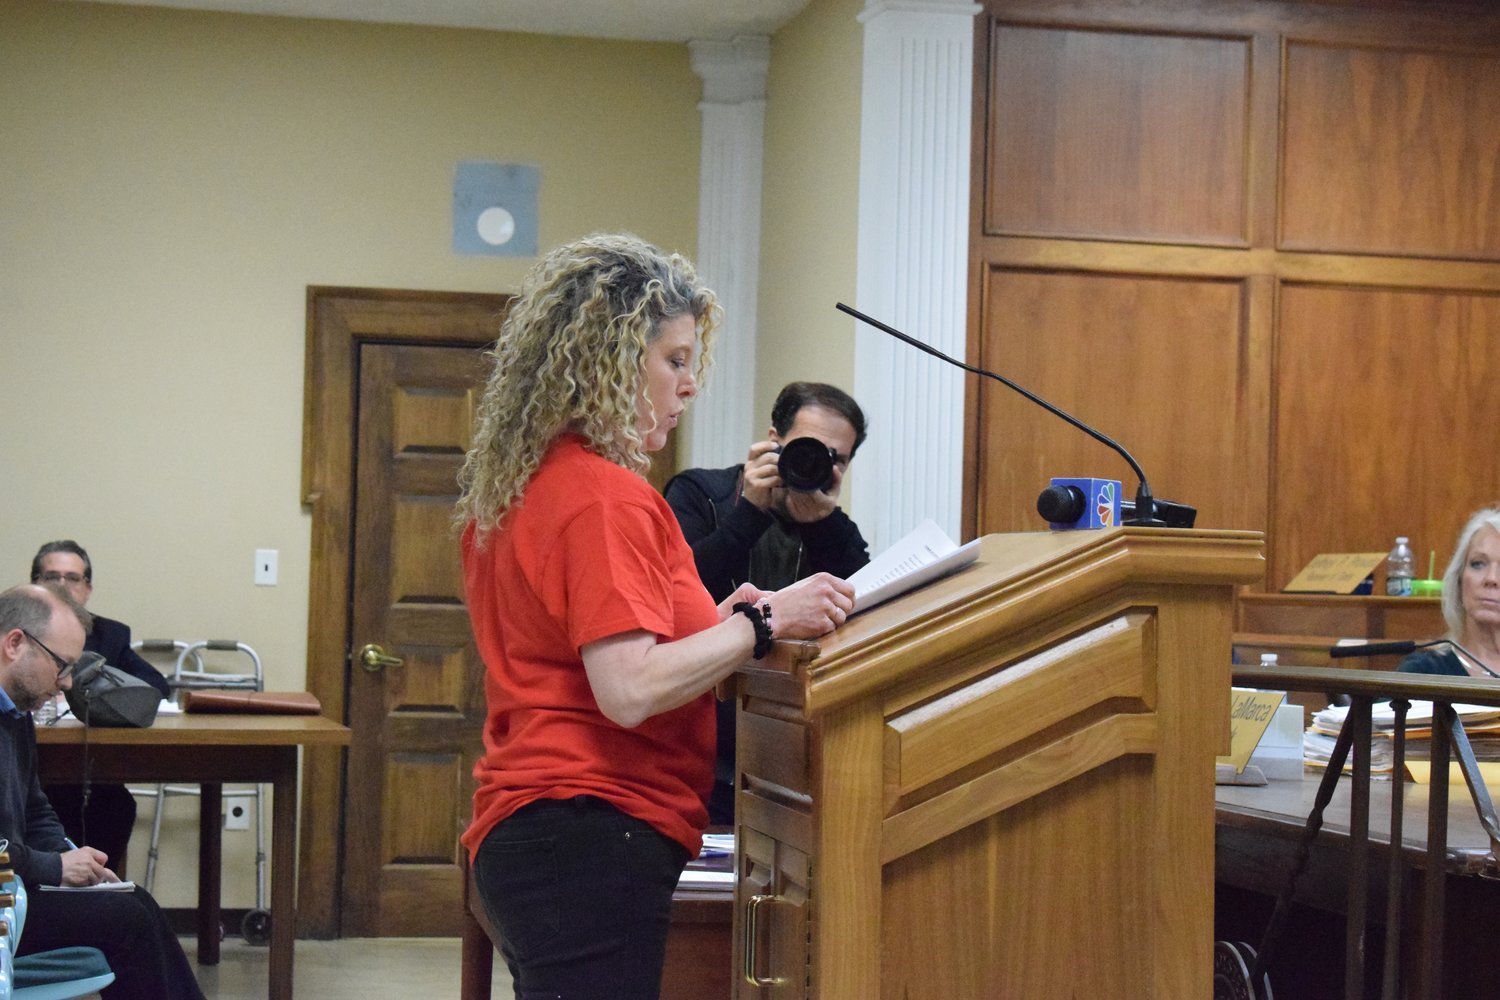 Lori Prisand advocated for changes at the Oyster Bay Animal Shelter during a Town Council meeting on Feb. 11.